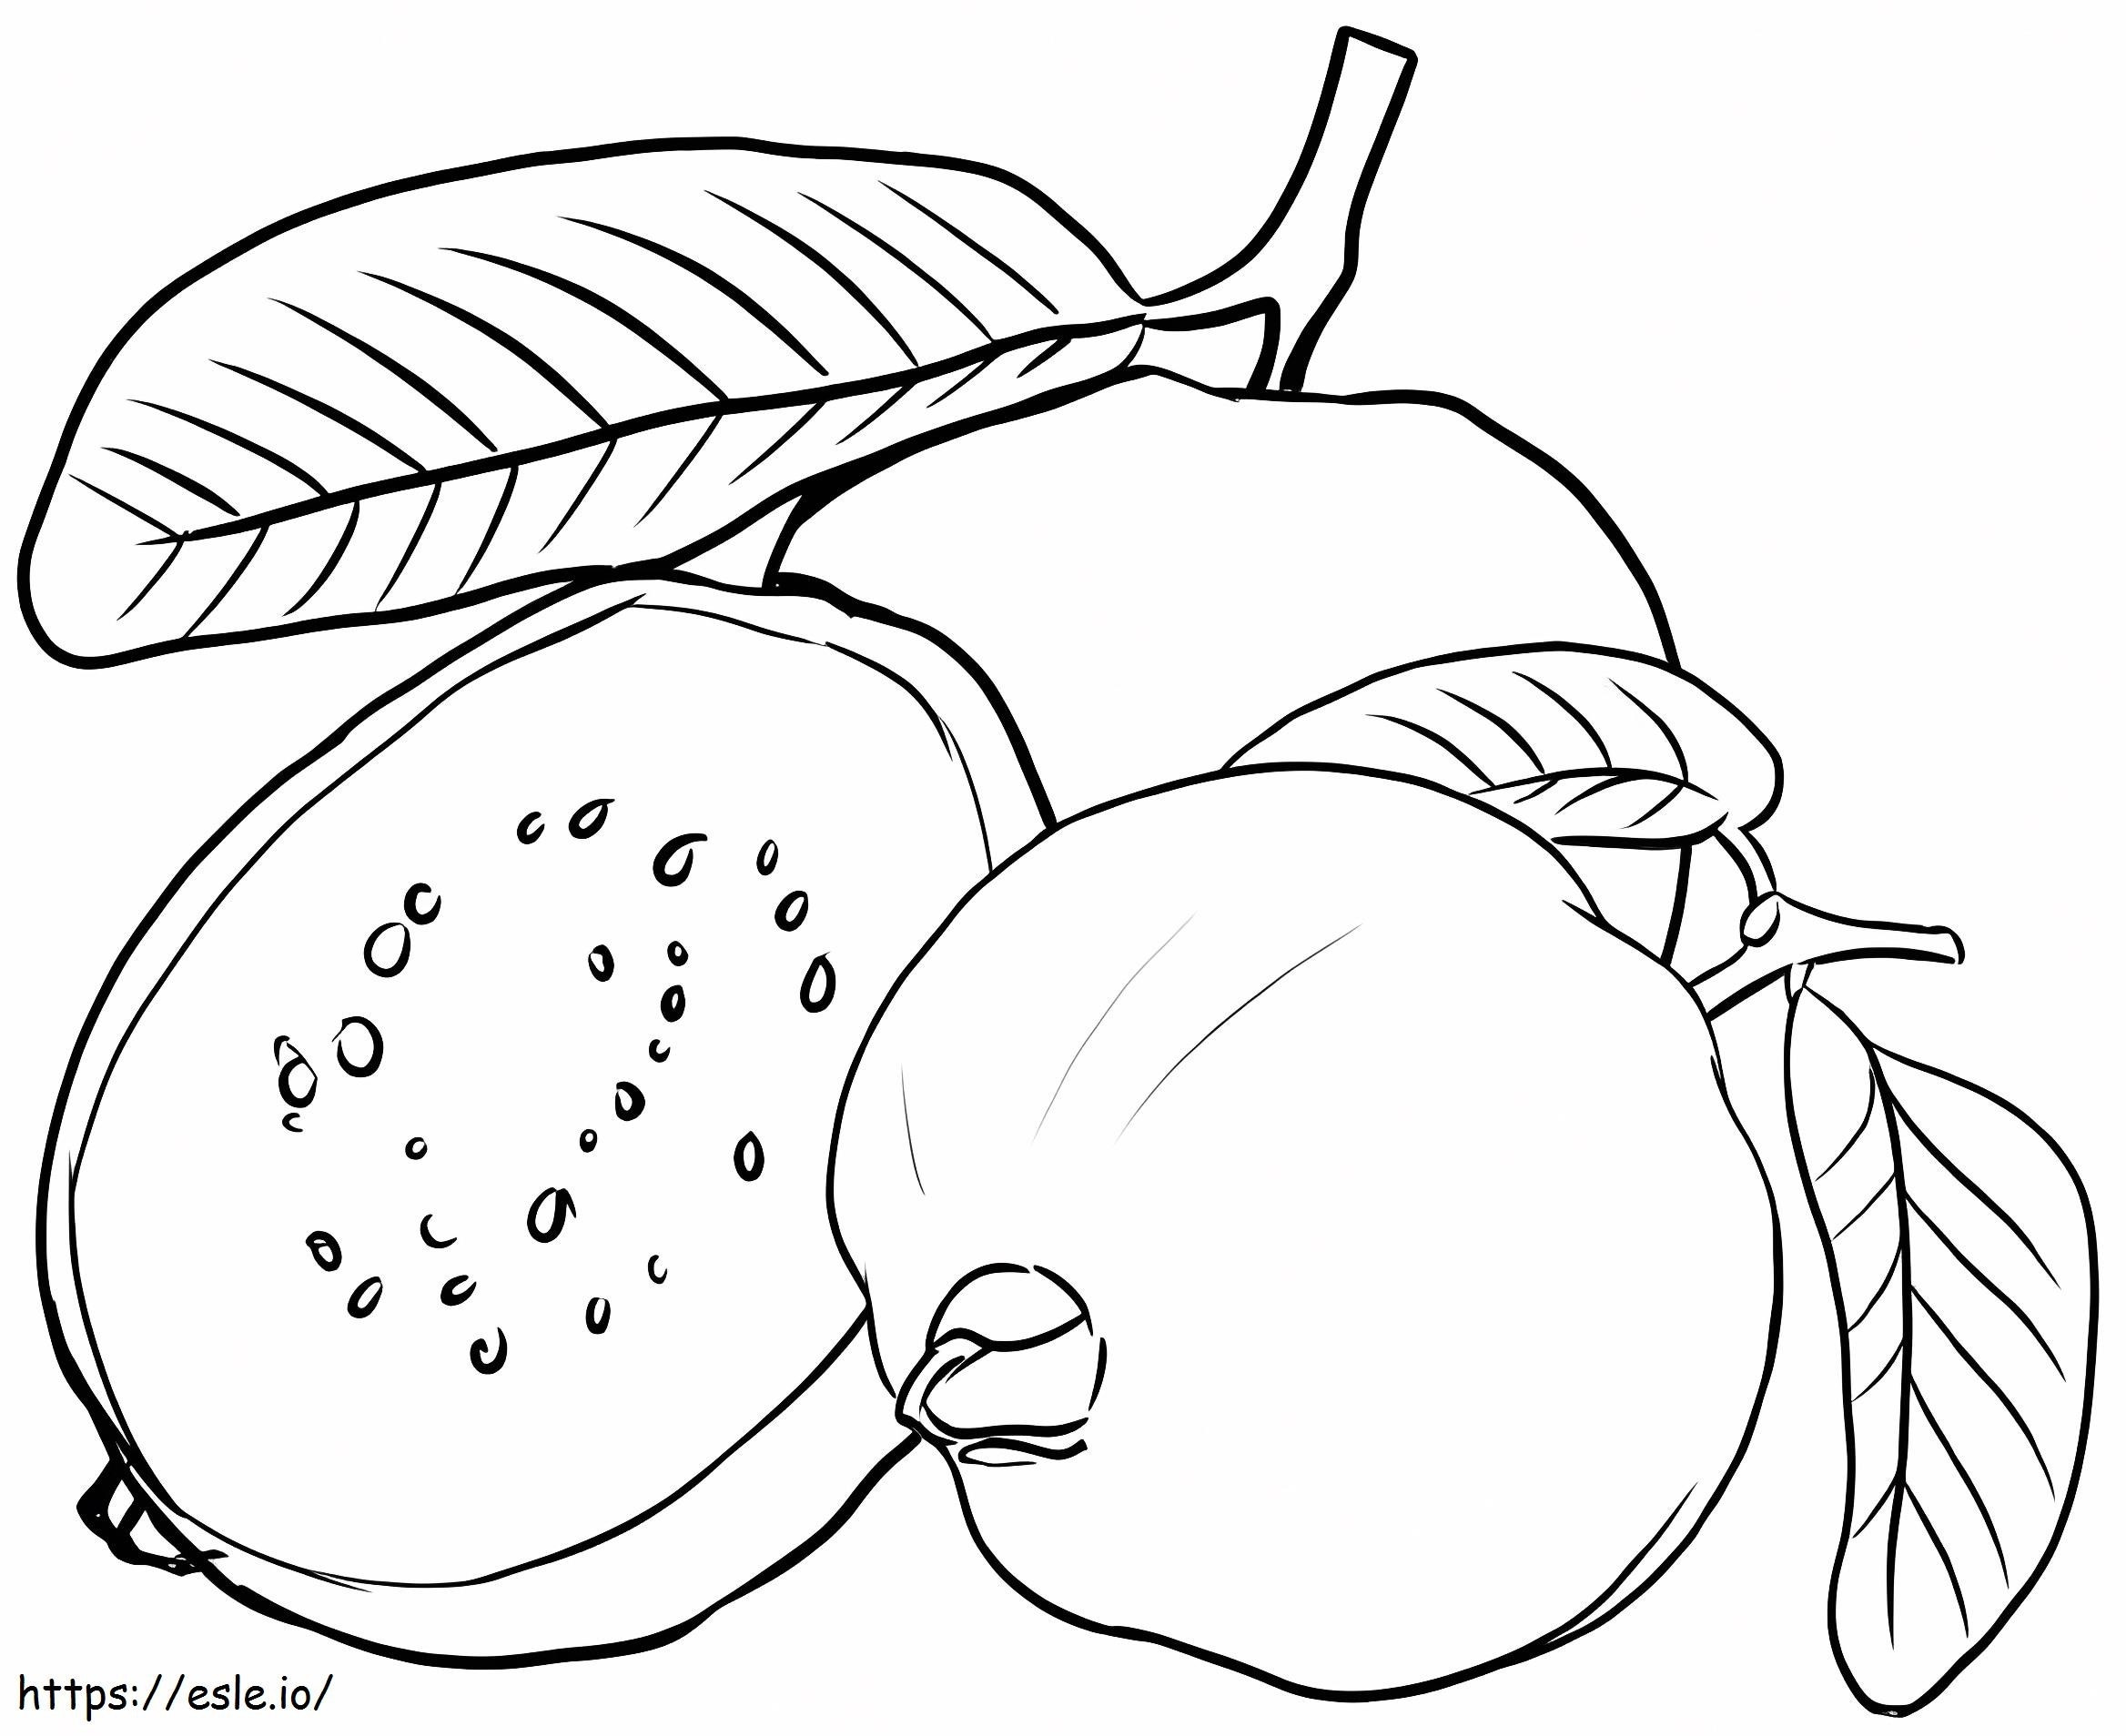 Simple Guava coloring page